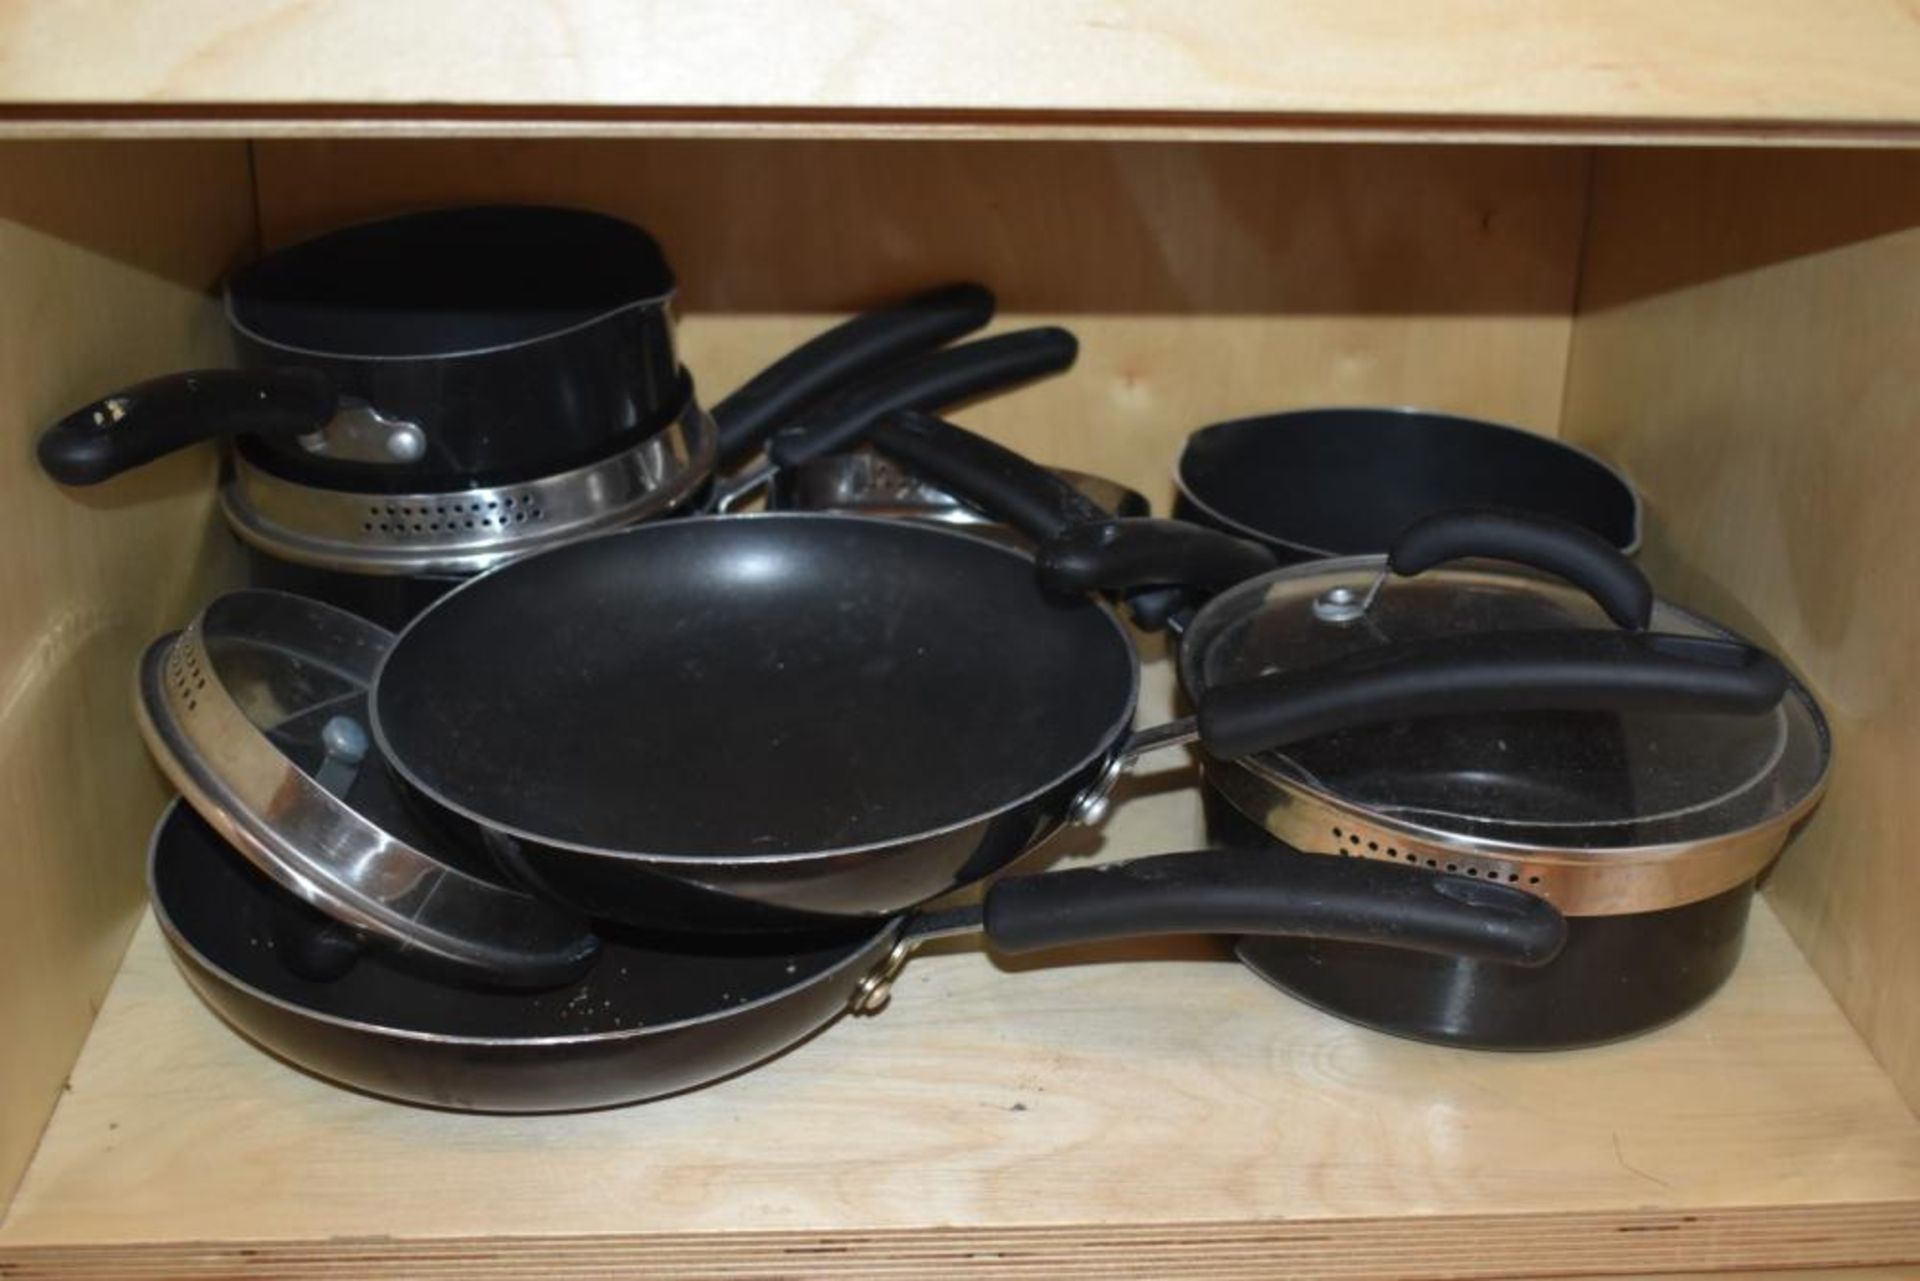 Large Collection of Kitchen Accessories Including Pans, Tubs, Bowls, Knife Set and Utensils etc -